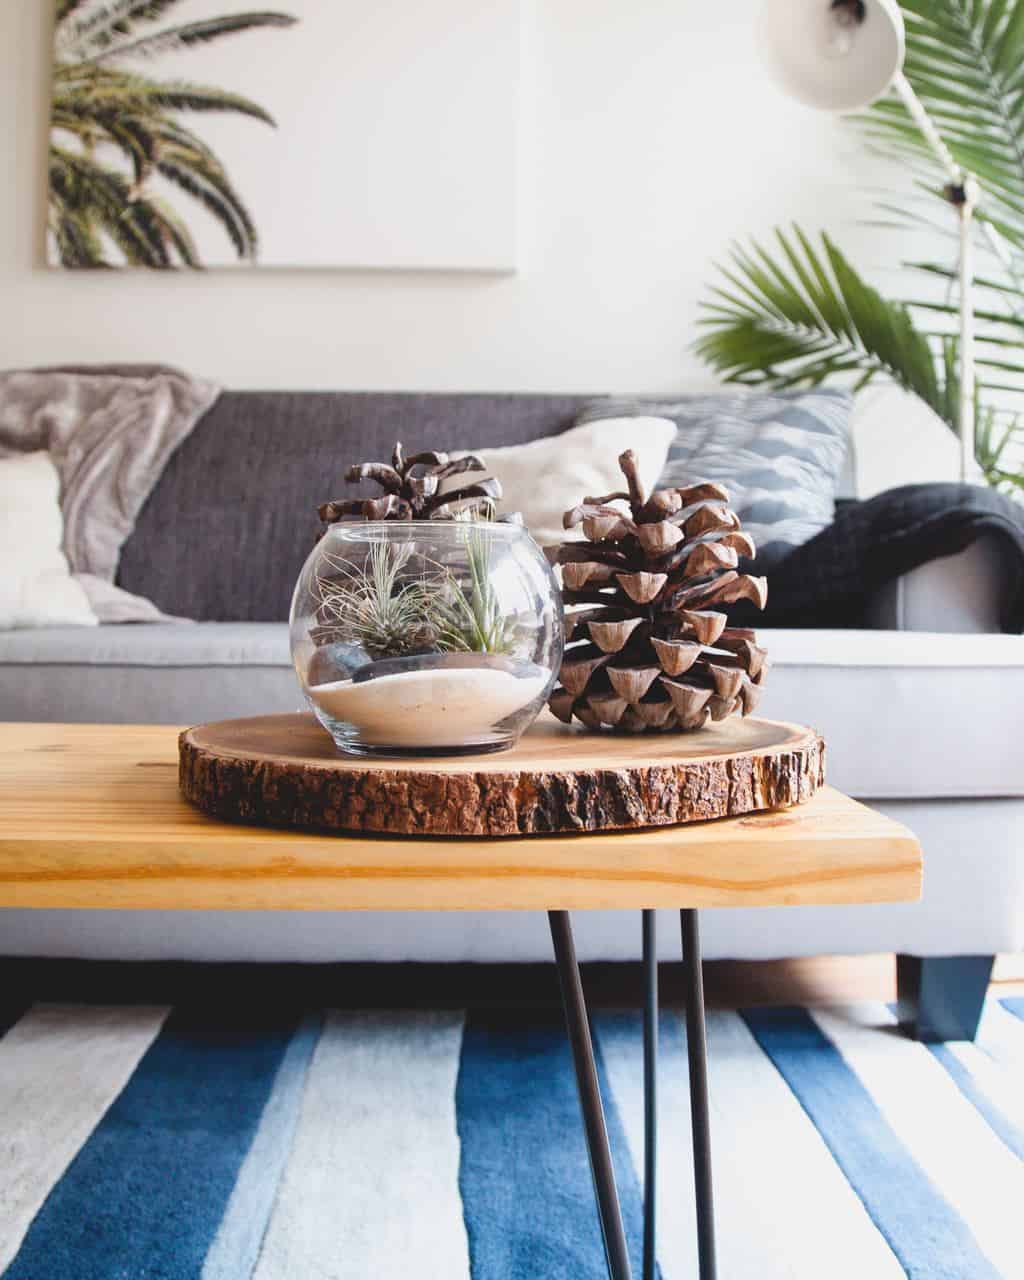 Decorating can be stressful and frustrating when you aren't in the mood to do it. These tips will show you how to decorate when you aren't inspired. 